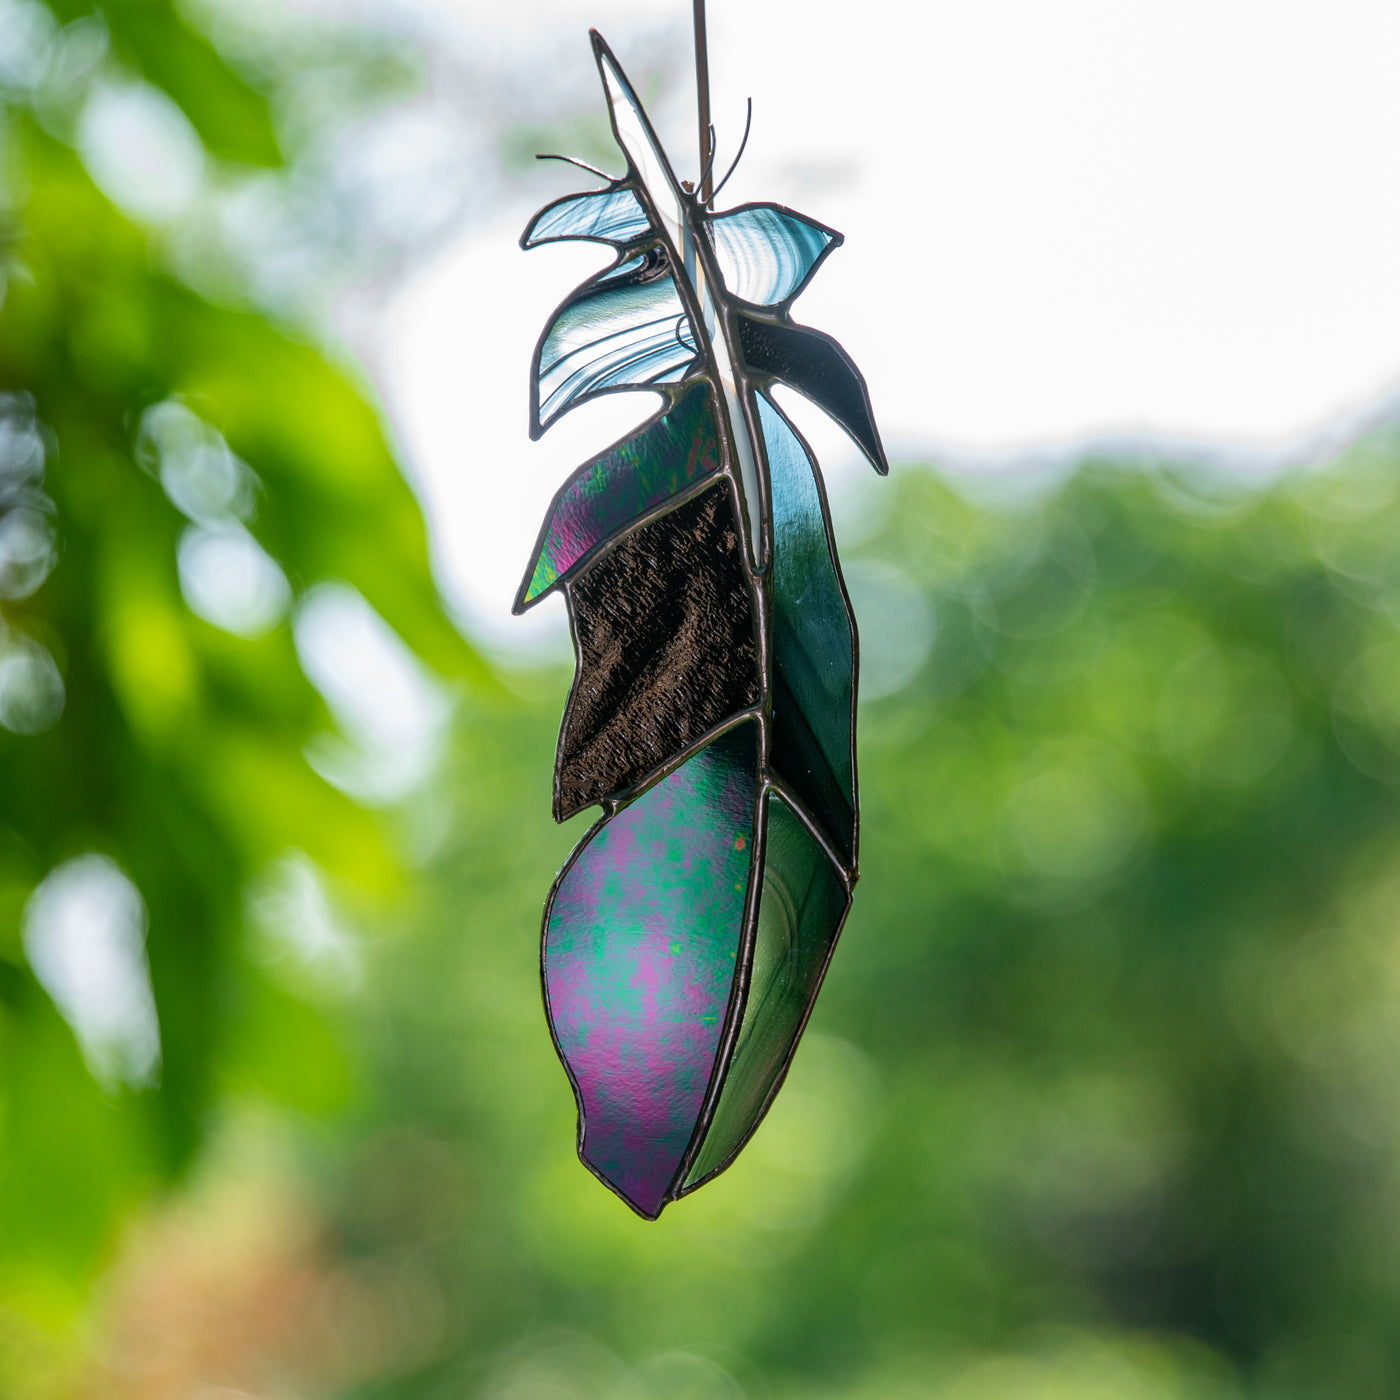 Suncatcher of a stained glass raven feather with modulating shades